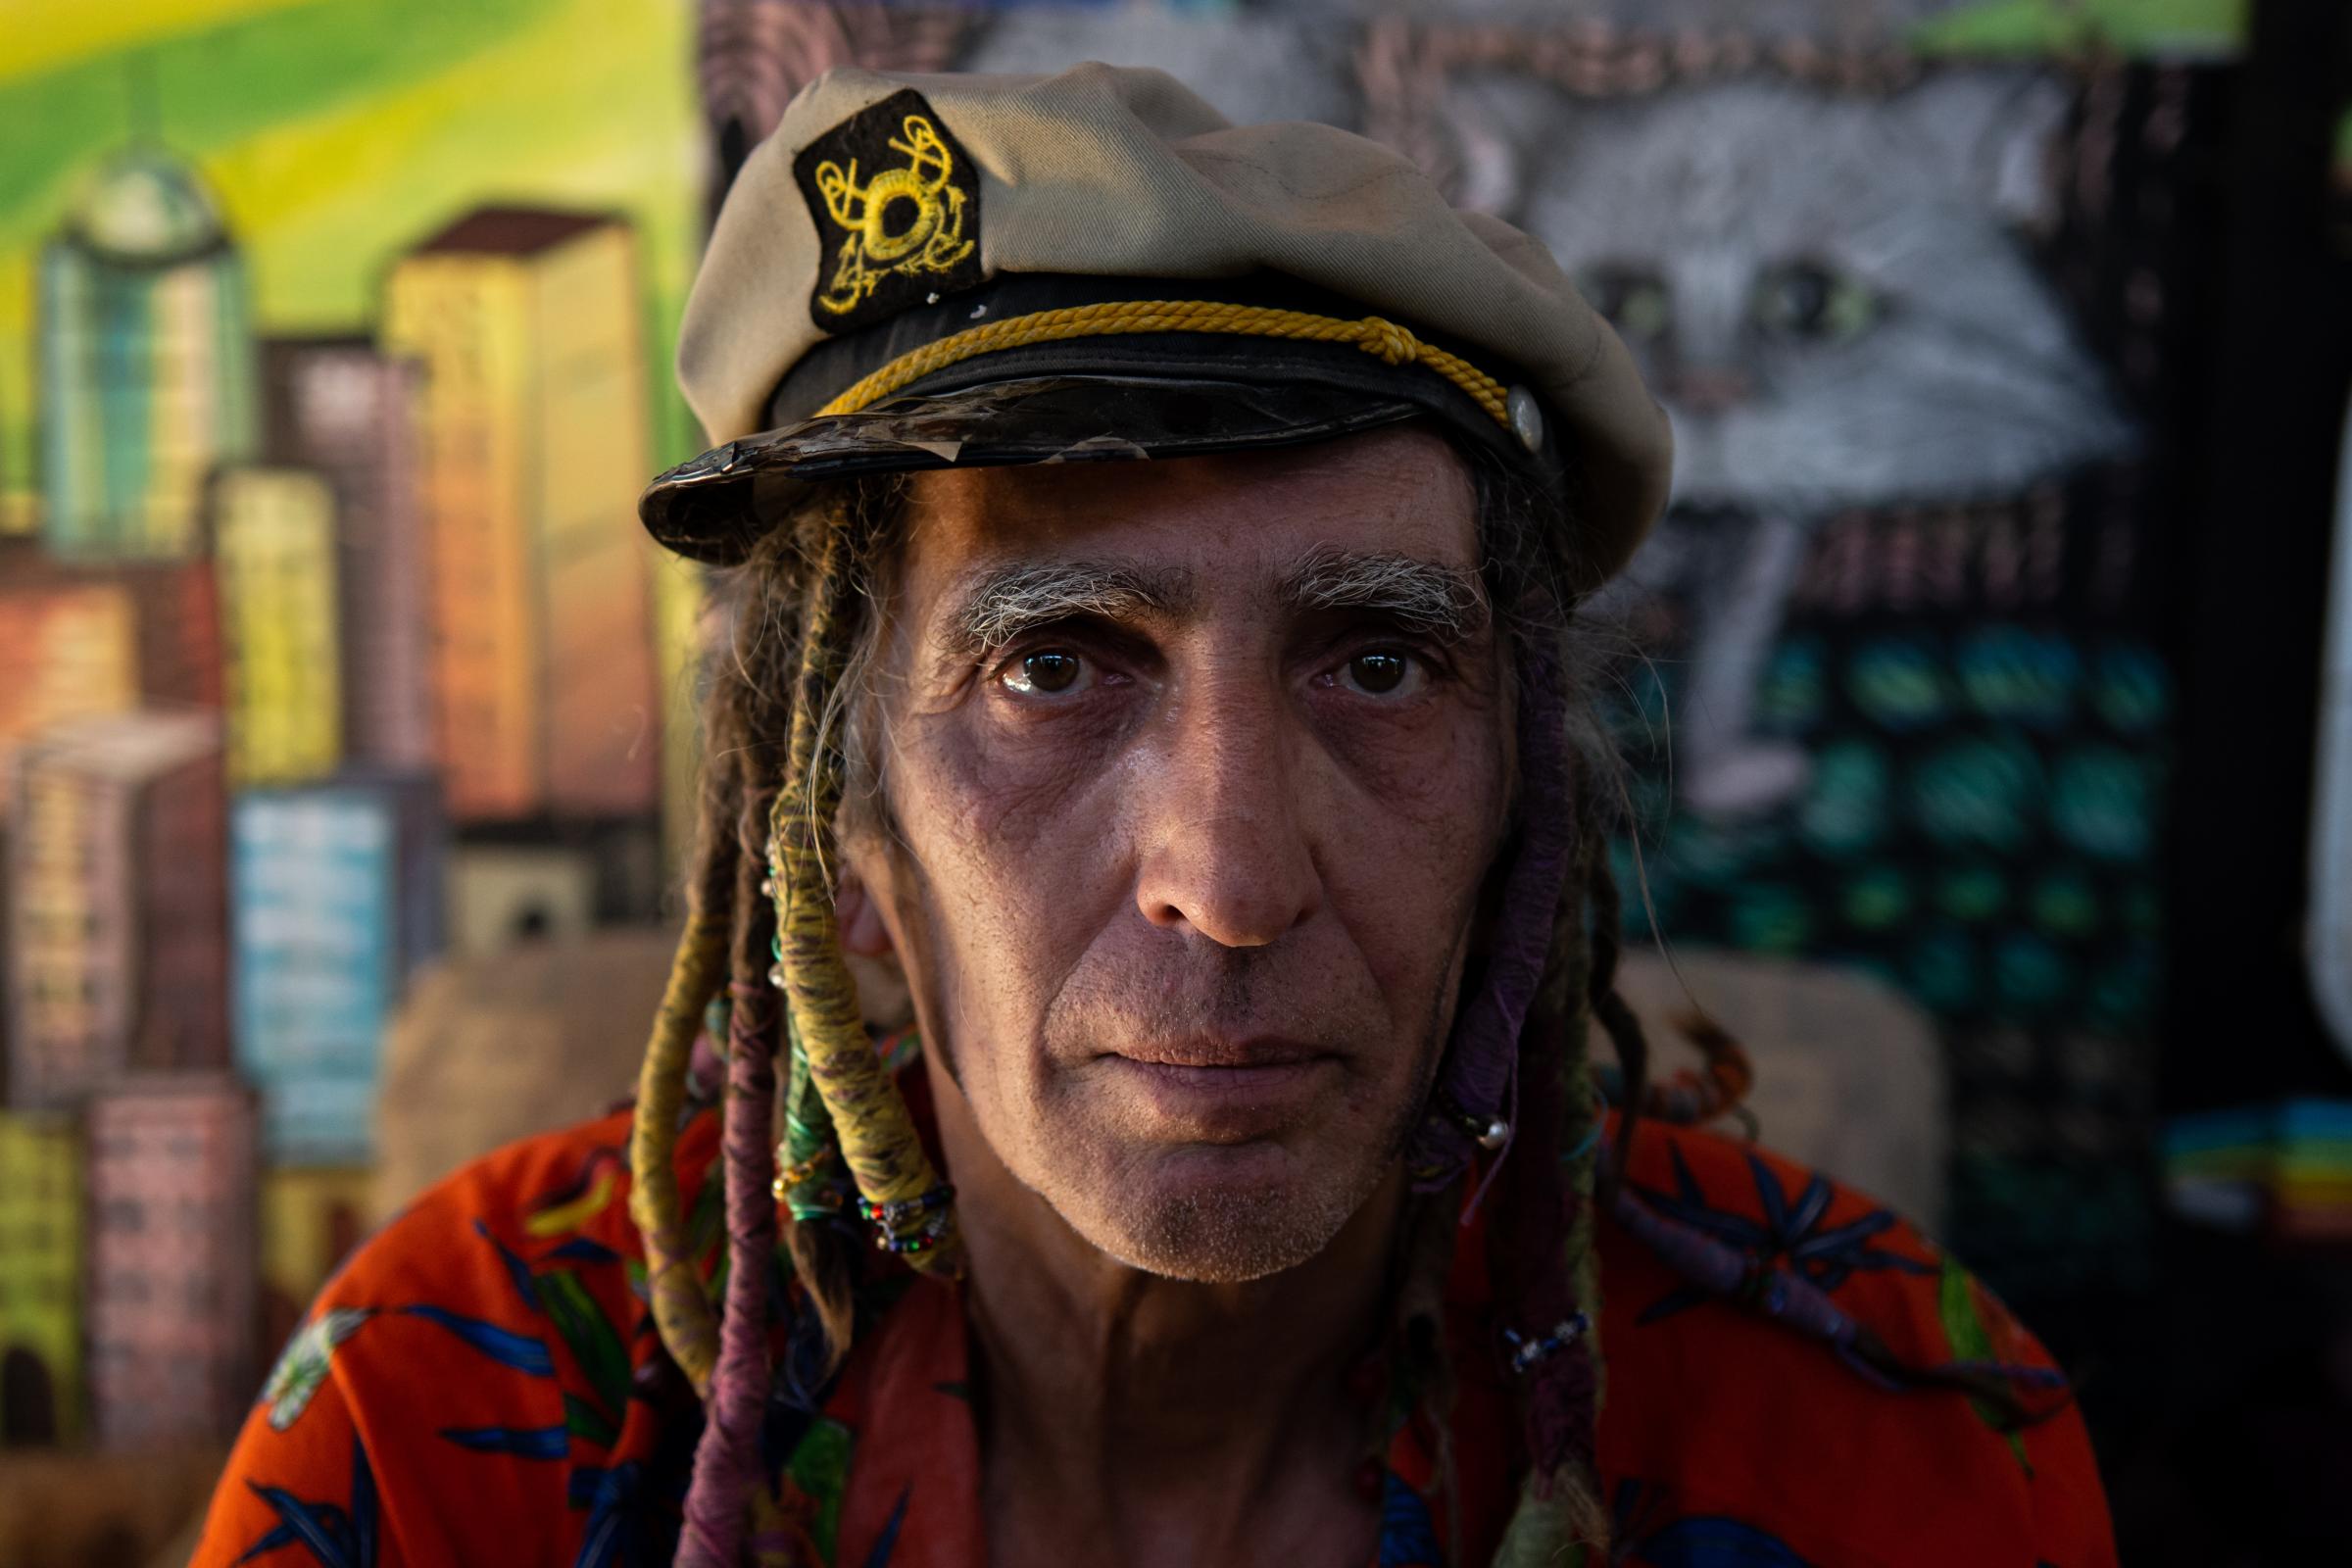 PHOTOGRAPHS - Jack Two Horse is the founder of Slab City Radio, a...